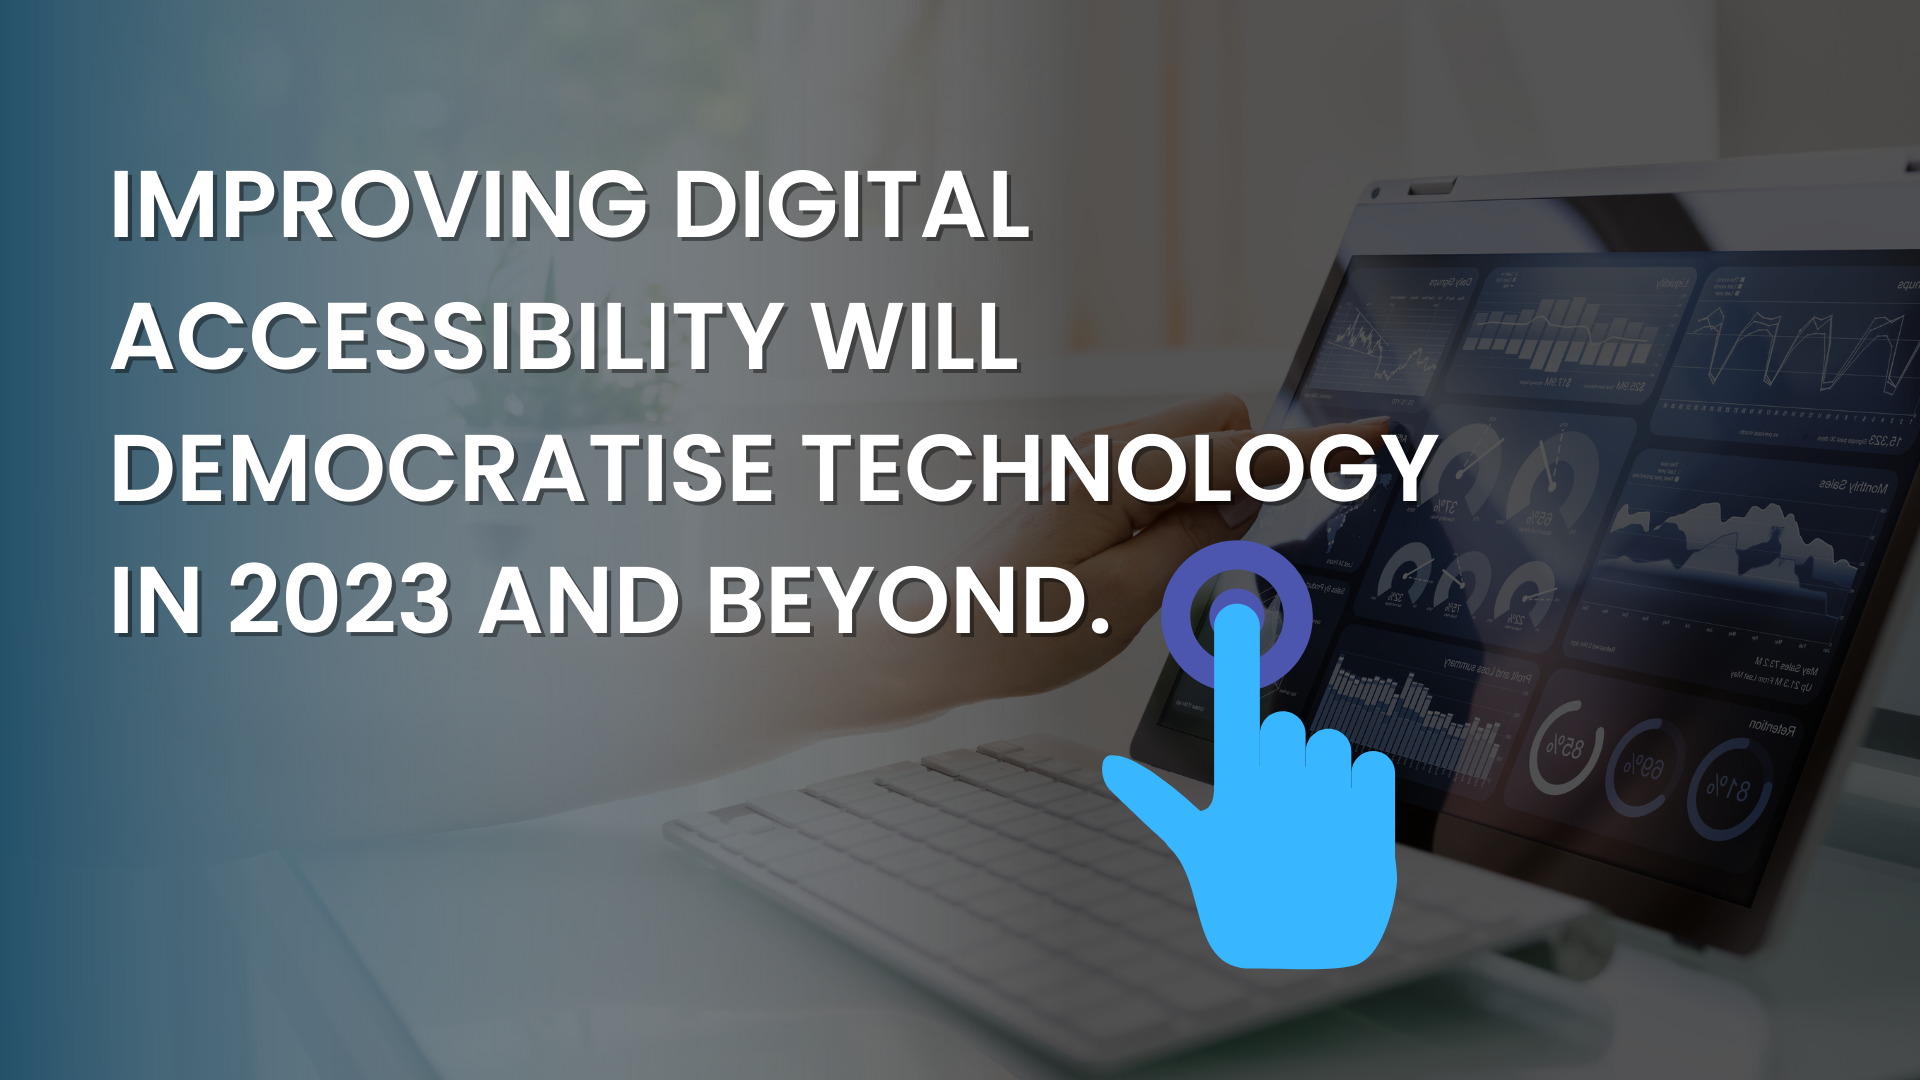 IMPROVING DIGITAL ACCESSIBILITY WILL DEMOCRATISE TECHNOLOGY IN 2023 AND BEYOND.